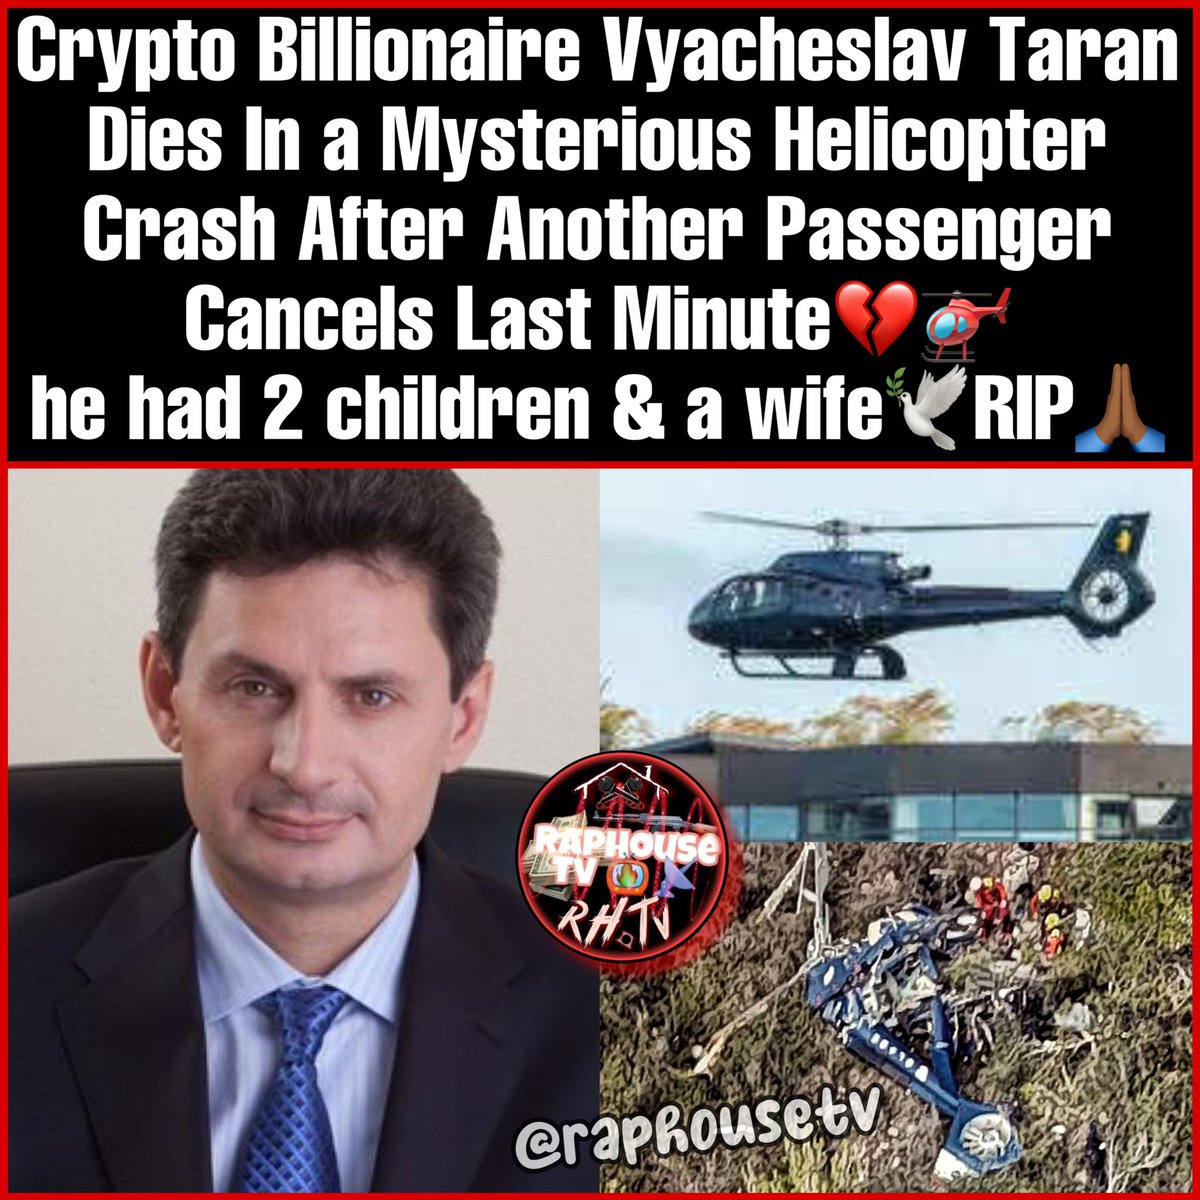 Crypto Billionaire Vyacheslav Taran
Dies In a Mysterious Helicopter Crash After Another Passenger Cancels Last Minute💔🚁
he had 2 children & a wife🕊️RIP🙏🏾